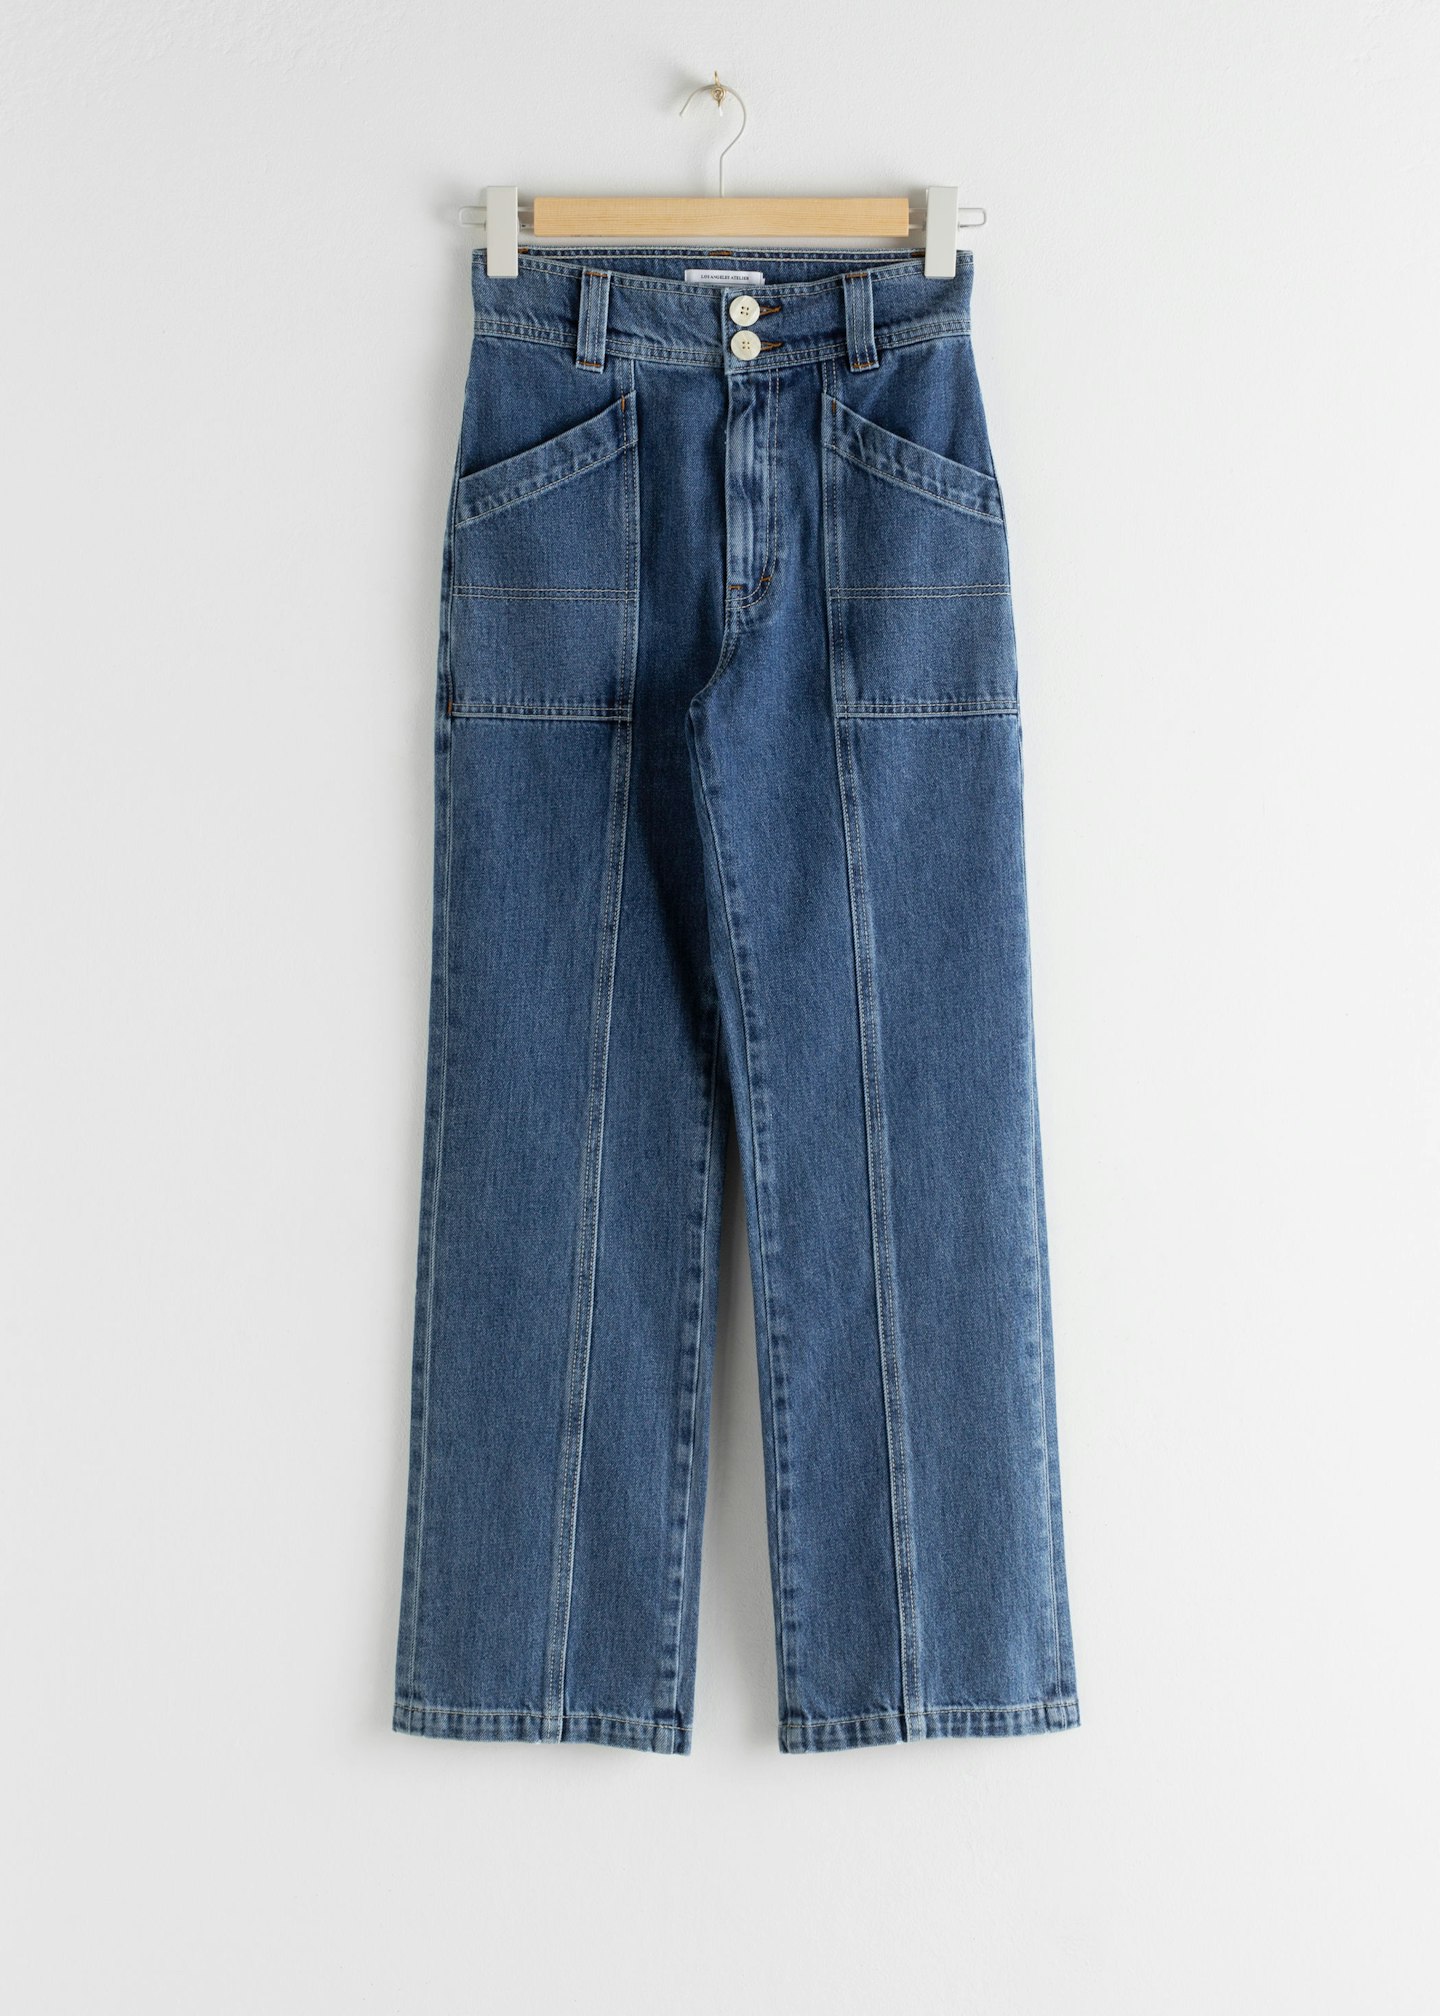 & Other Stories, Straight High Rise Utility Jeans, £65